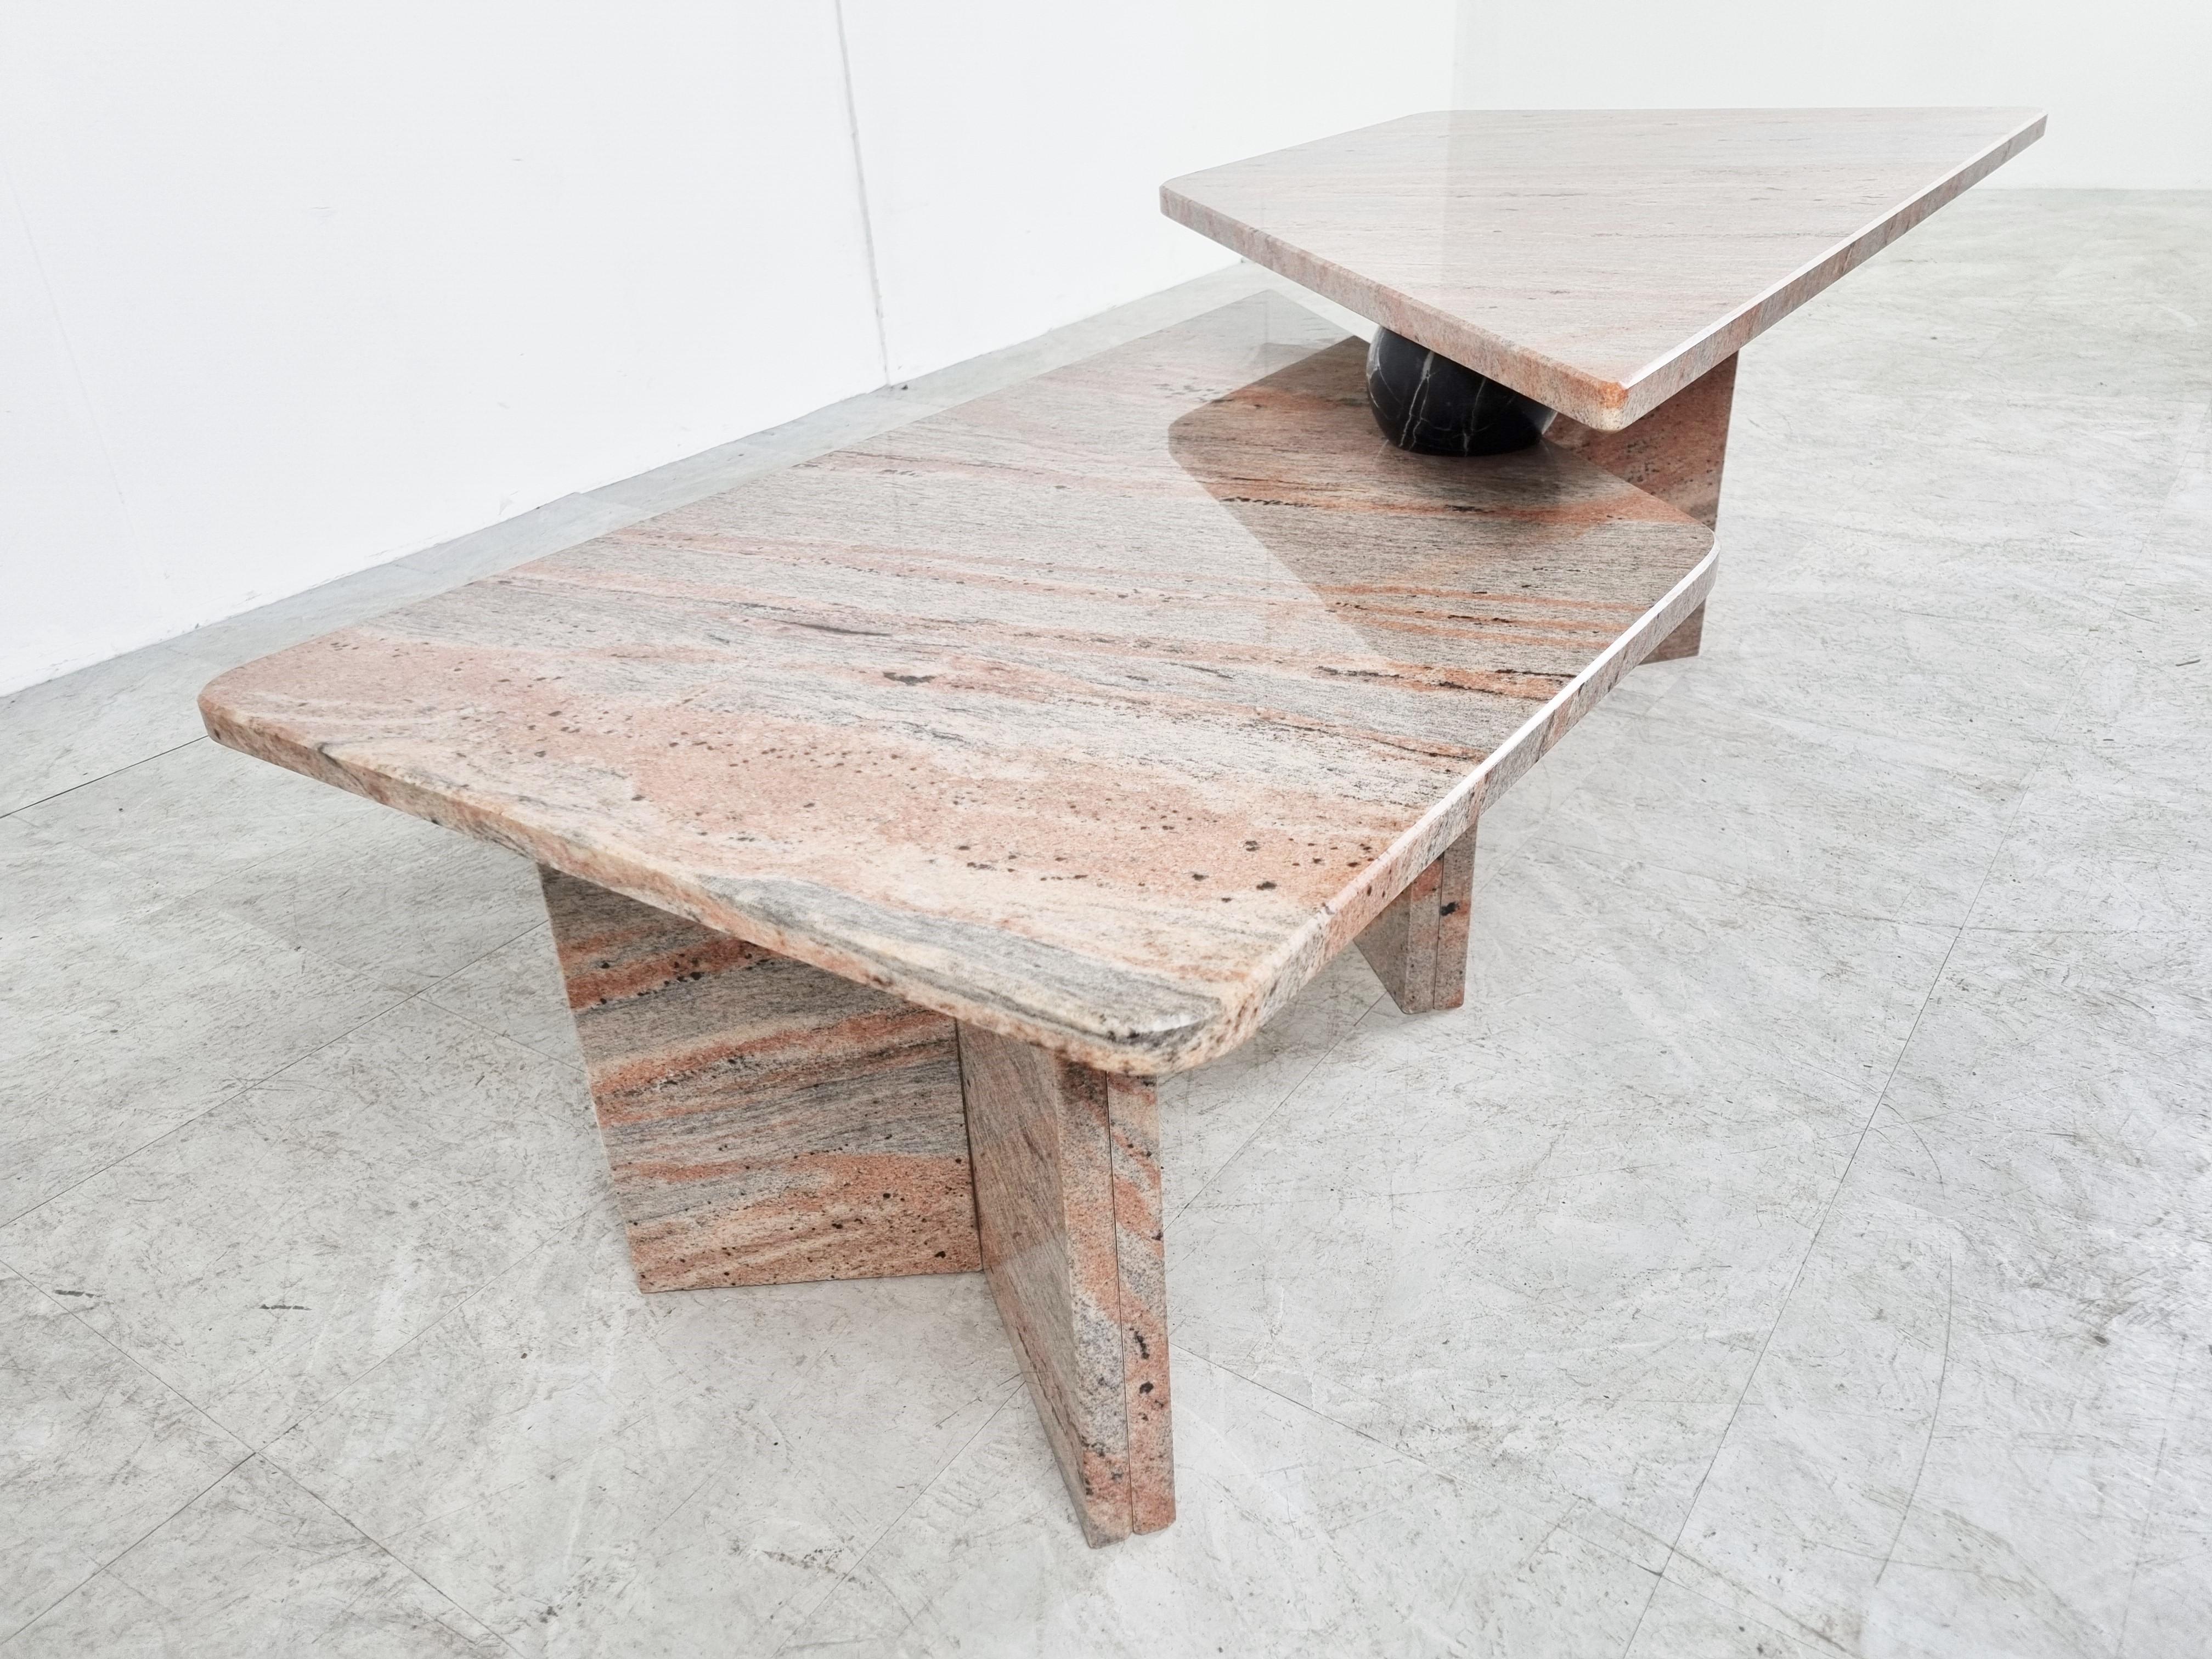 Architectural coffee table made from red/orange granite stone.

The coffee table consists of two parts which rest on each other trough the black marble 'sphere'.

The vaining in the stone is beautiful and the rare colour also makes this table